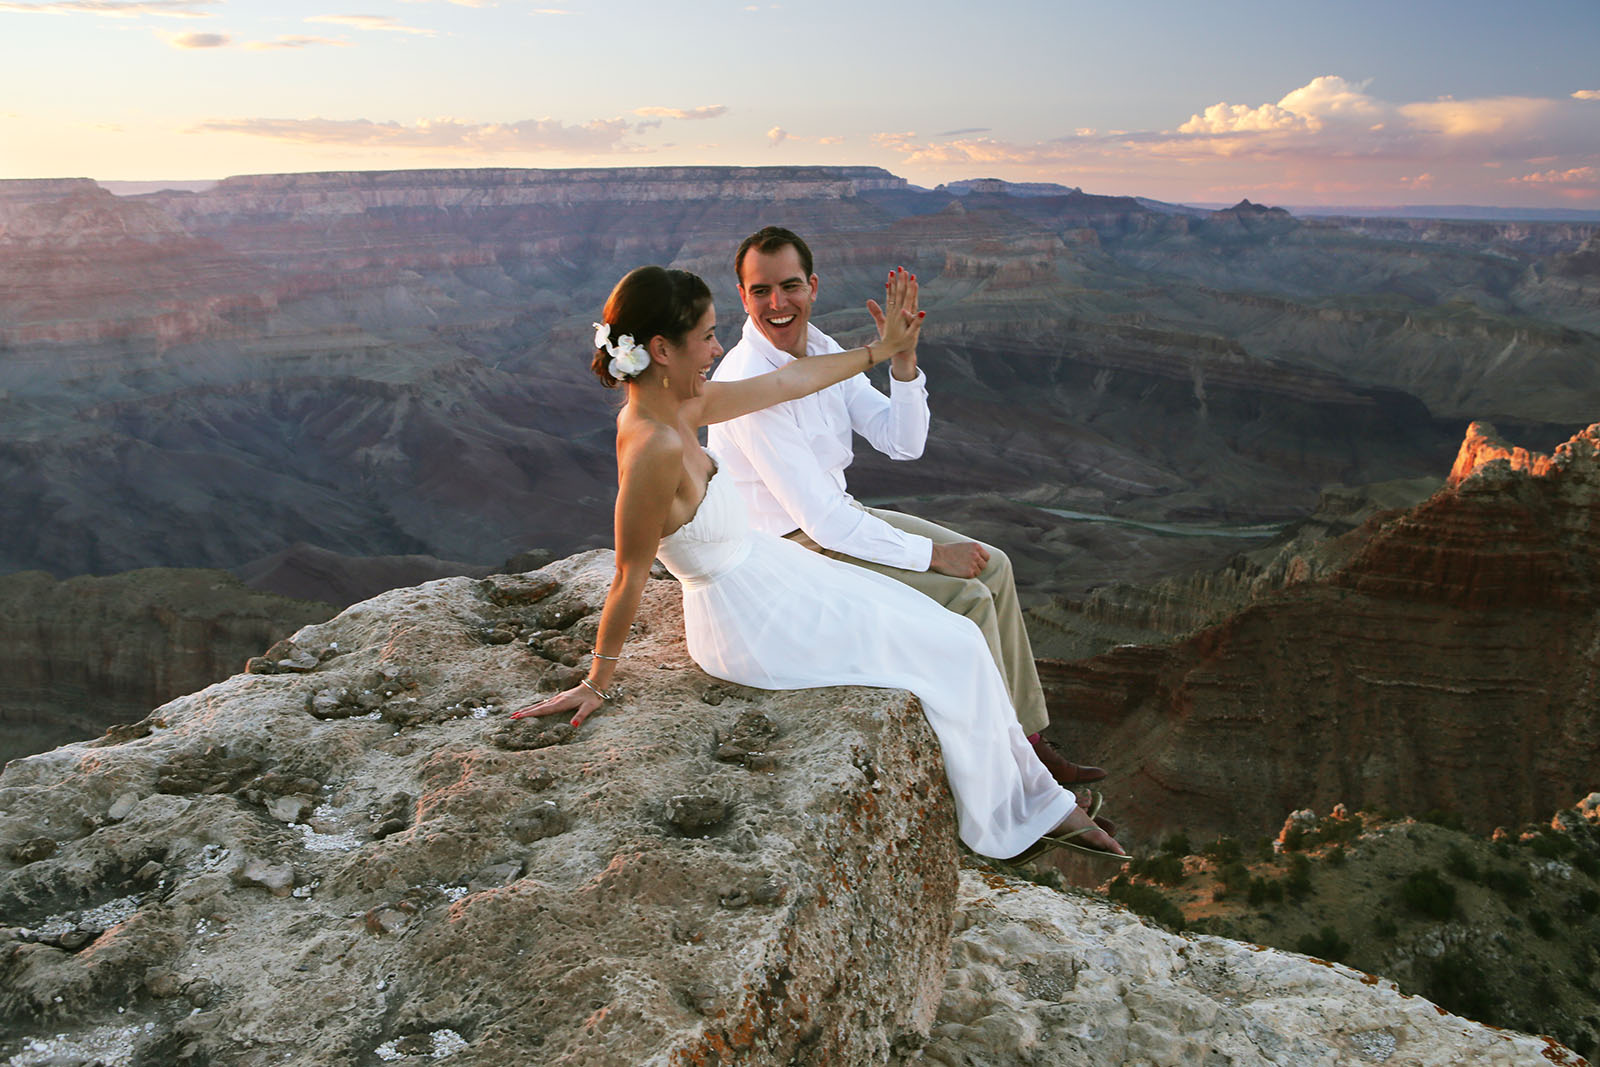 Young eloping couple celebrating their wedding at the Grand Canyon